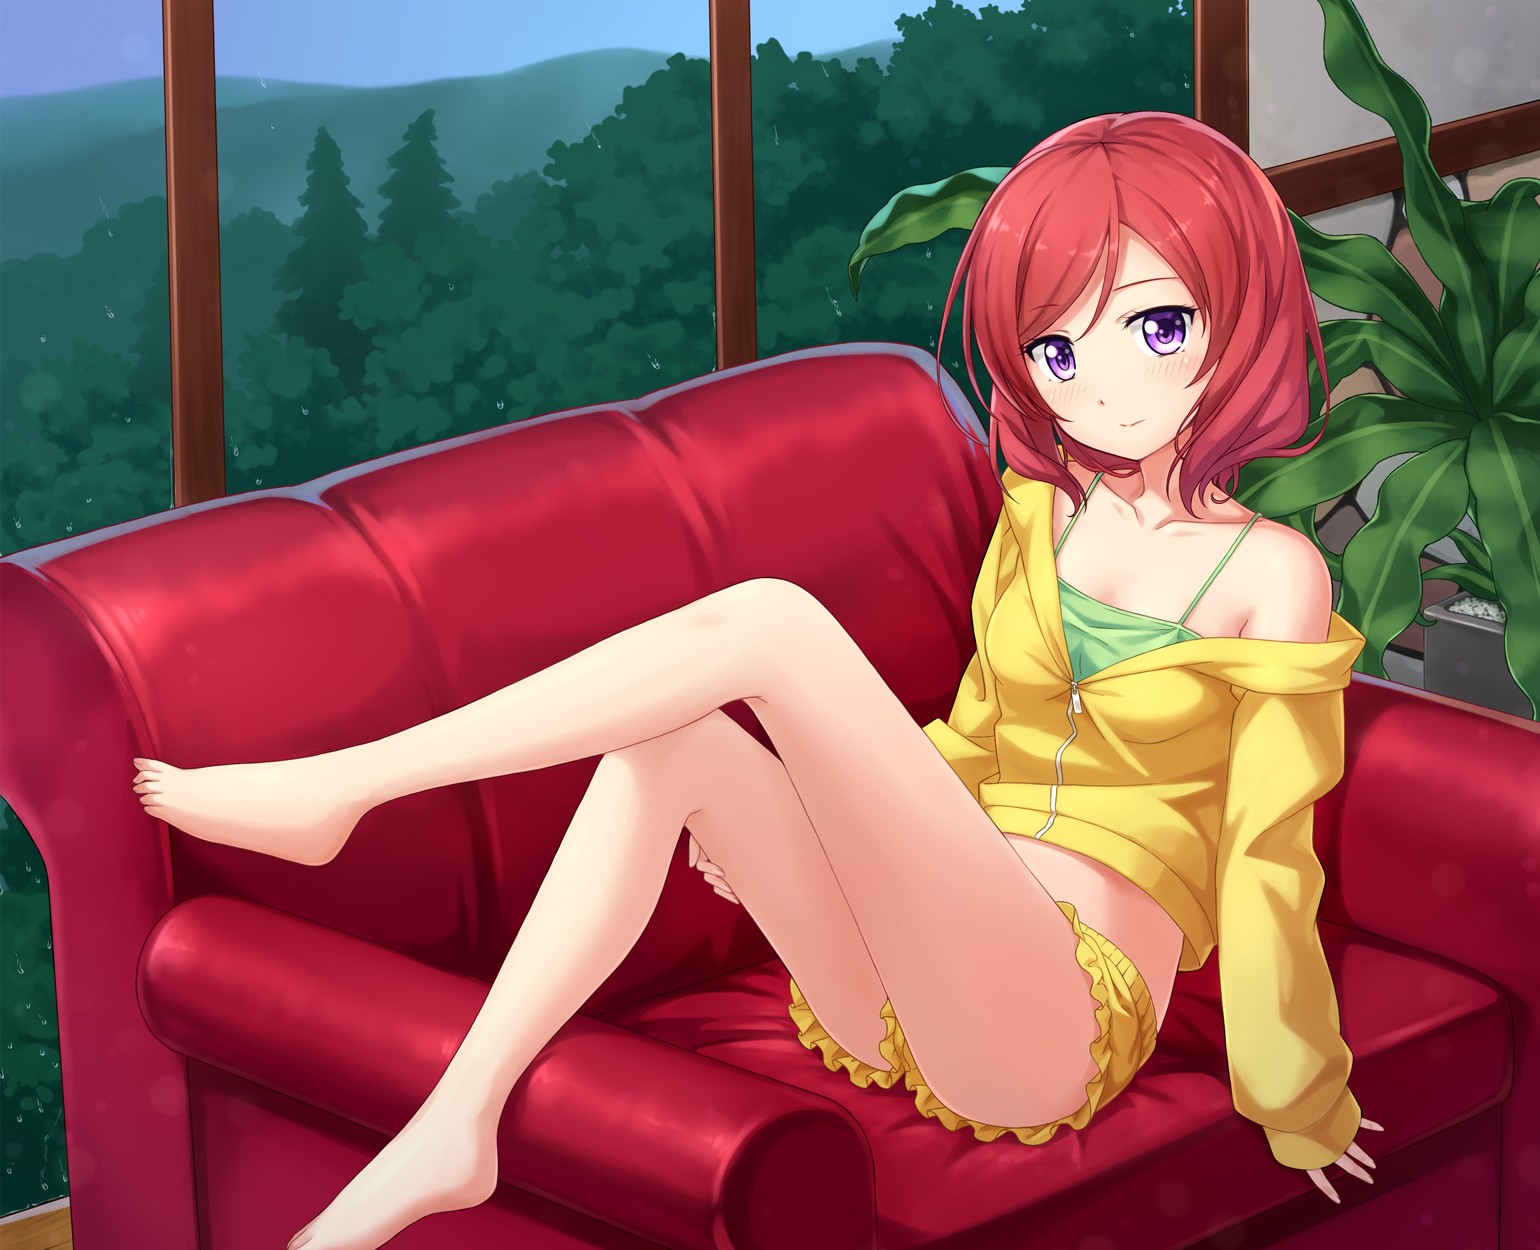 Anime 1540x1250 anime anime girls Love Live! redhead purple eyes feet Nishikino Maki couch Pixiv thighs legs looking at viewer shoulder length hair pants red couch